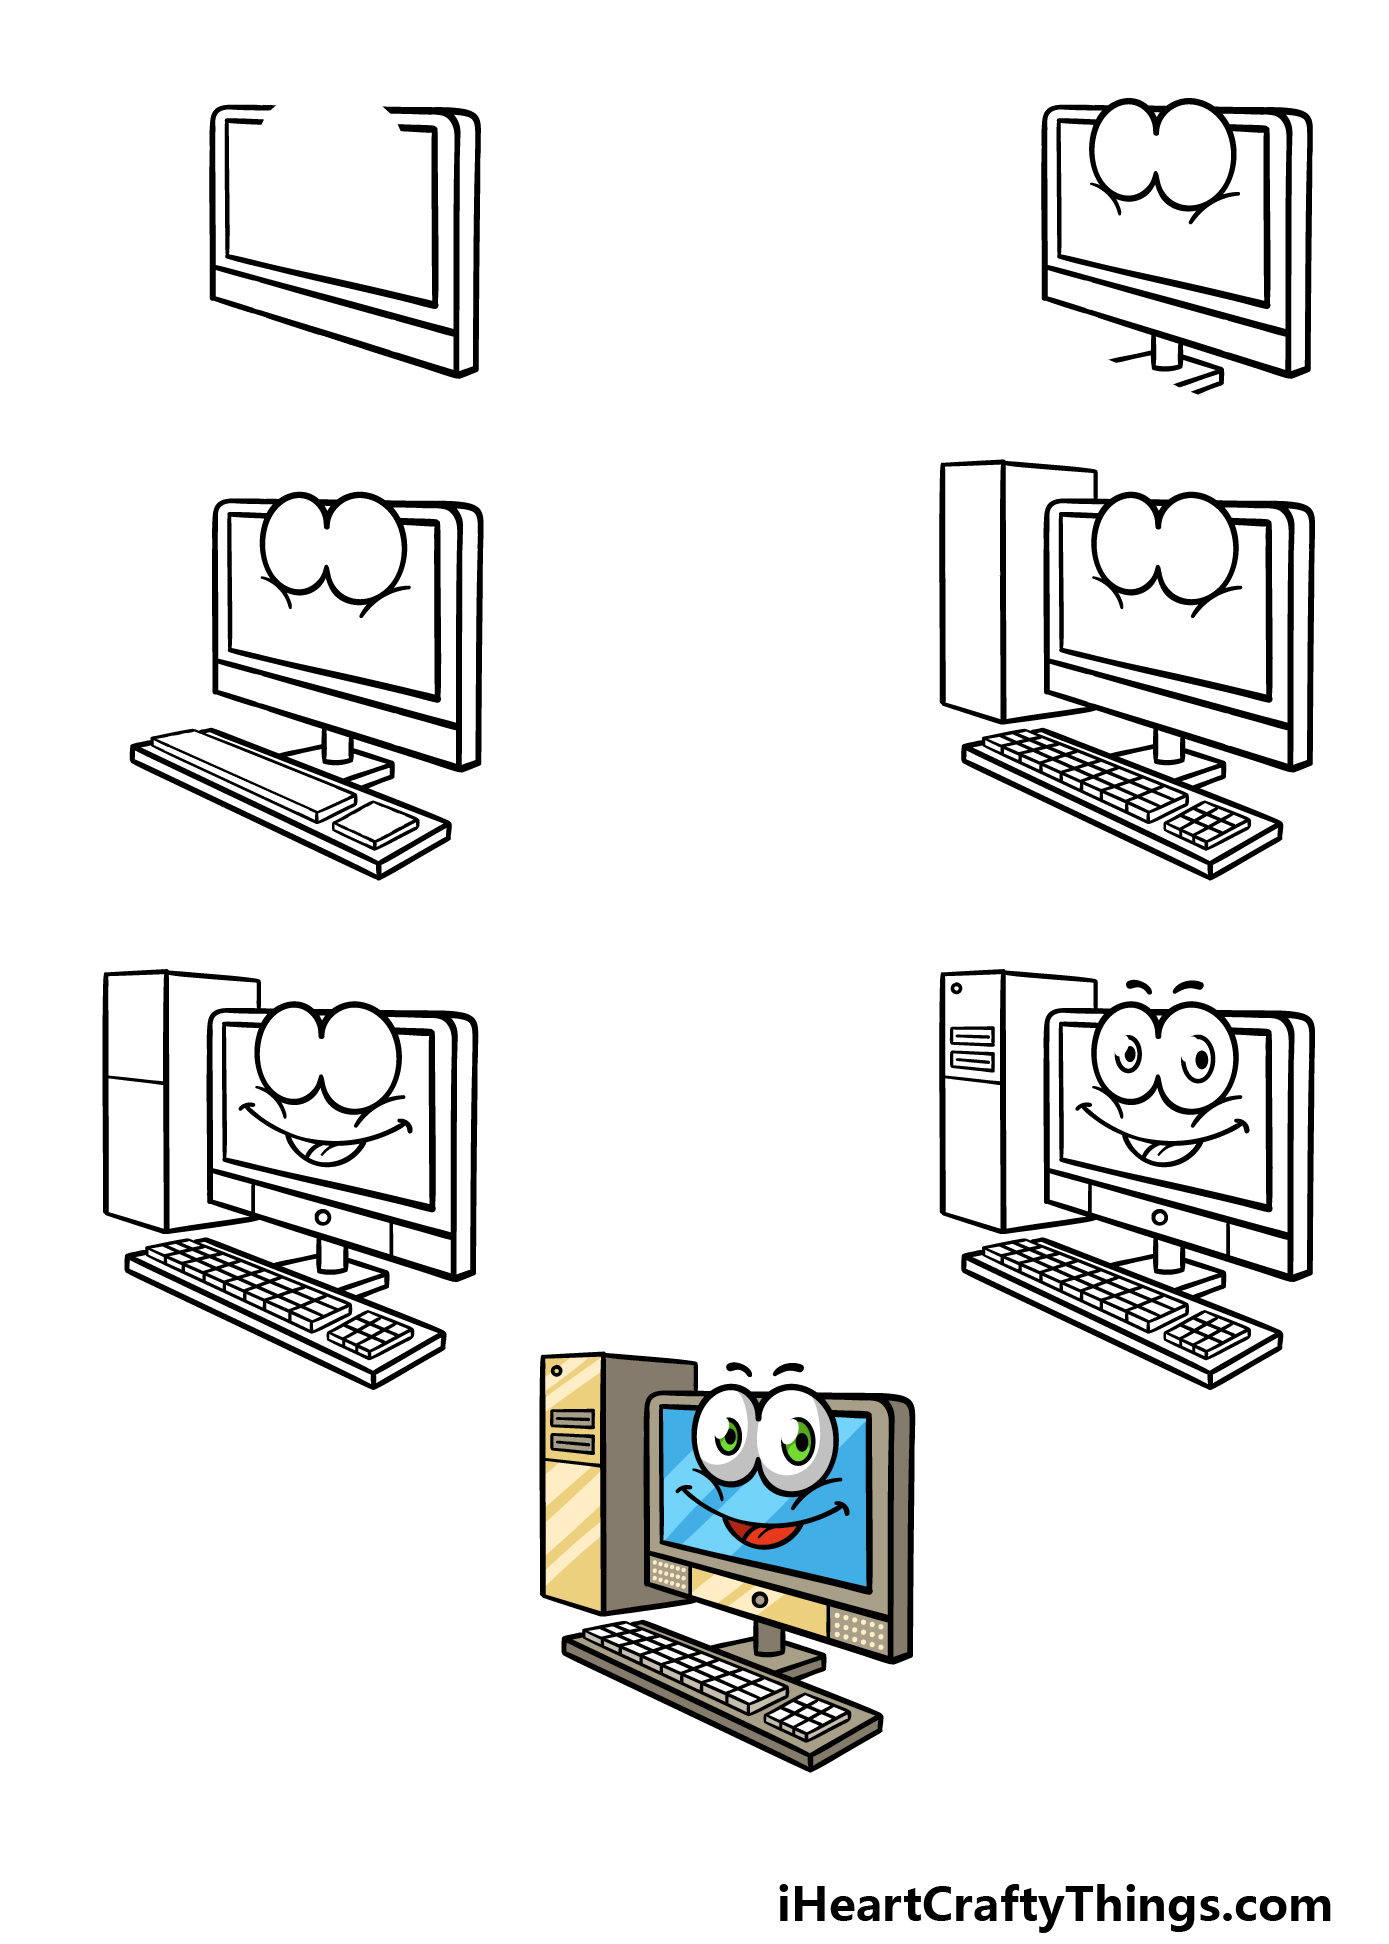 Cartoon Computer Drawing - How To Draw A Cartoon Computer Step By Step